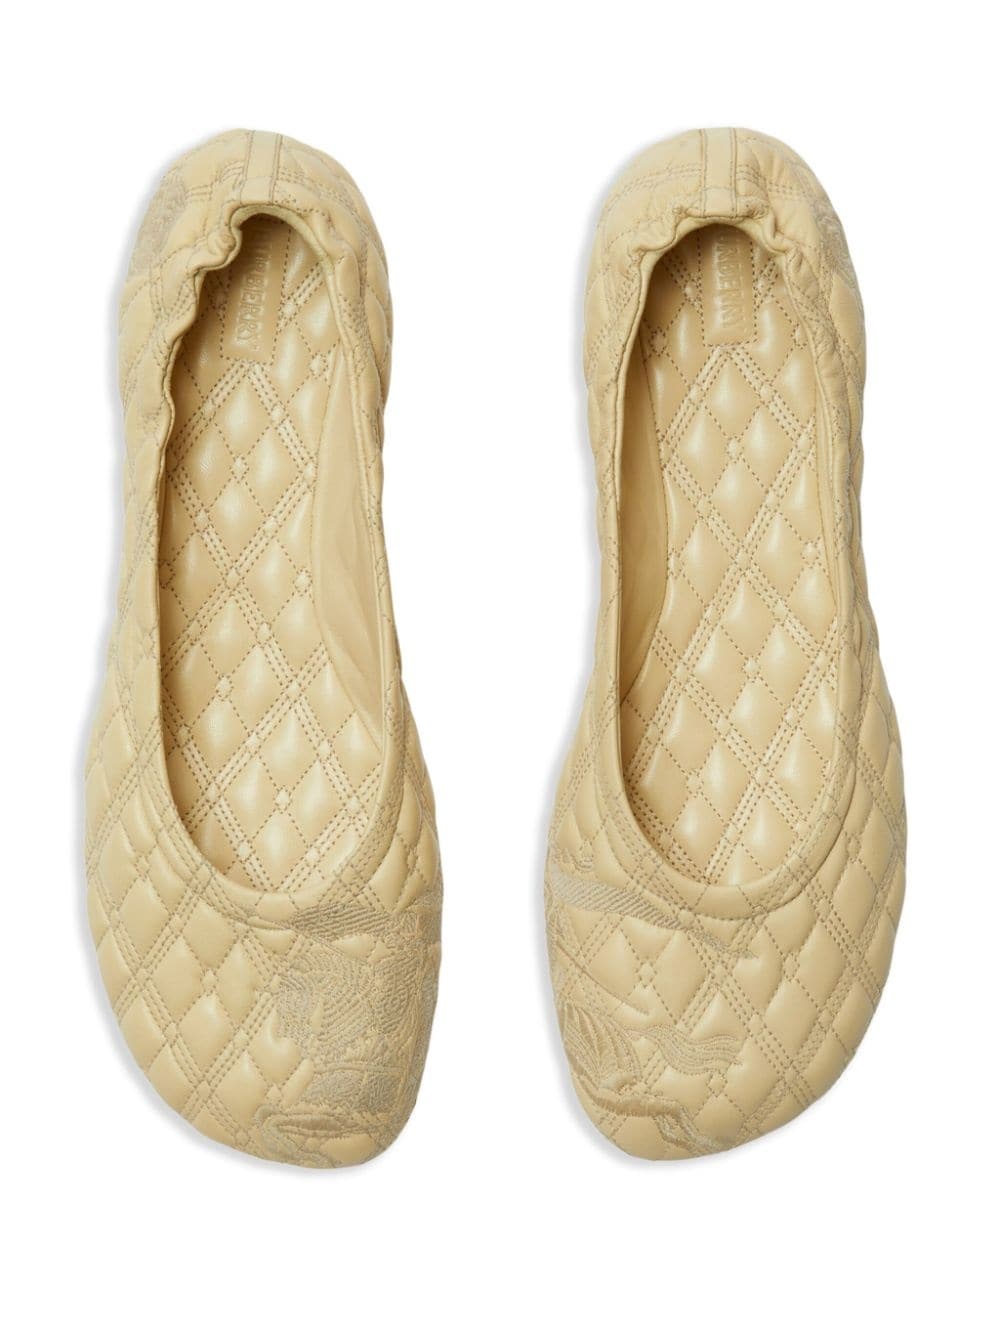 quilted leather ballerina shoes - 4